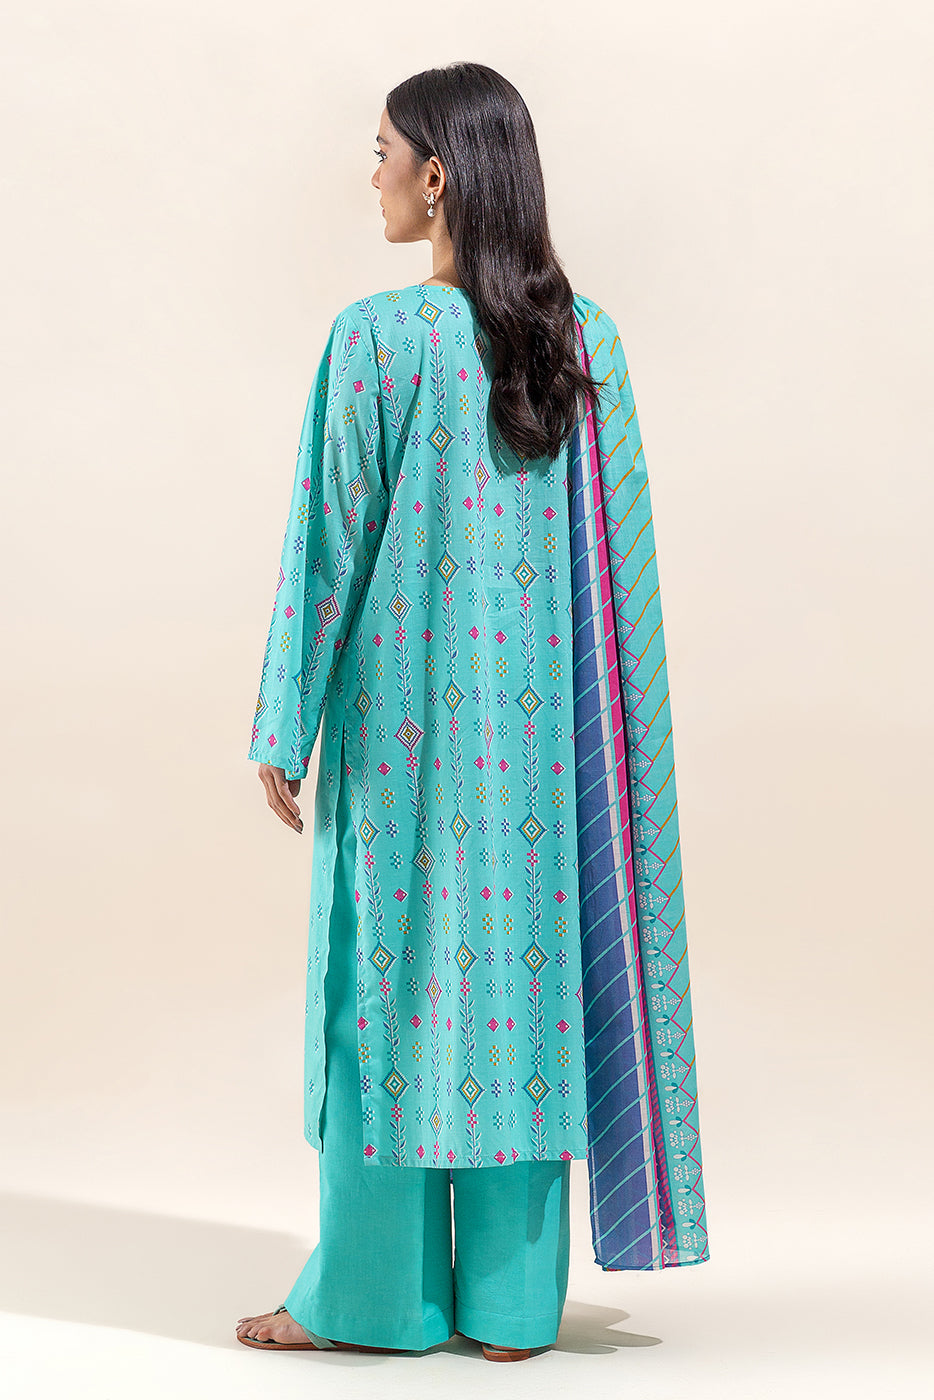 2 PIECE EMBROIDERED LAWN SUIT-REEF WATERS (UNSTITCHED)